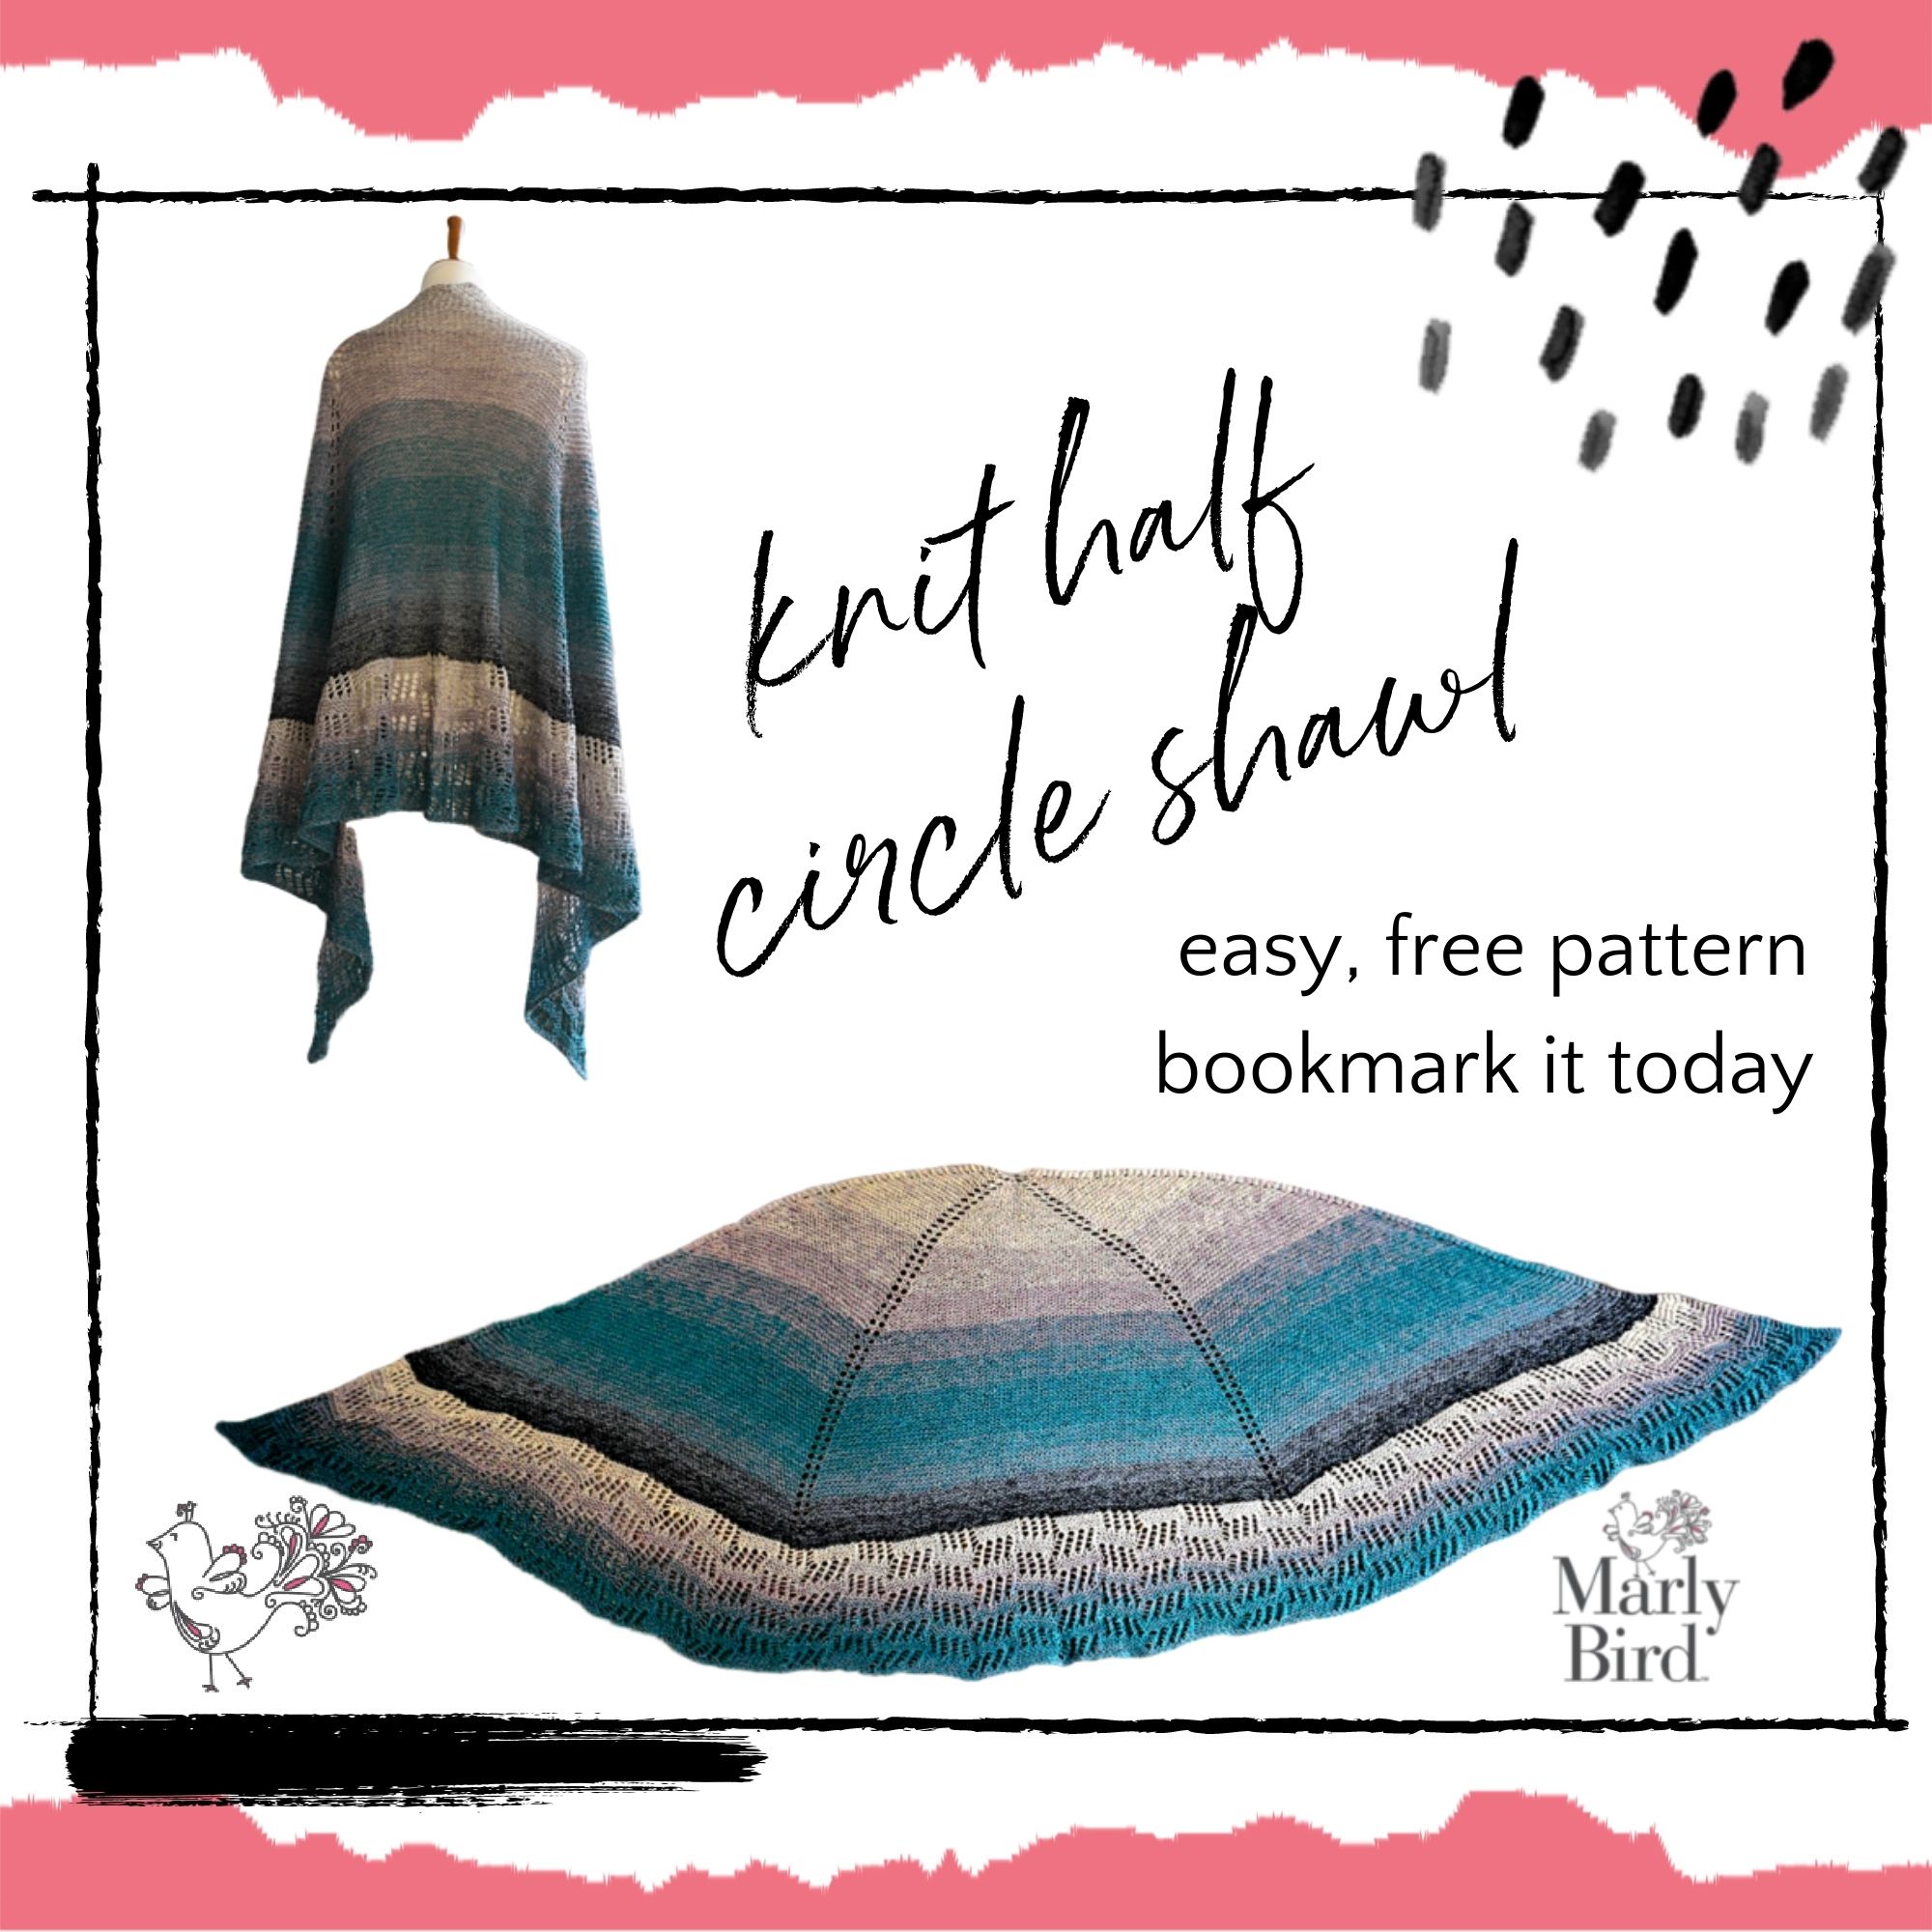 Start Your Next Knit Half Circle Shawl With This Free Pattern Marly Bird